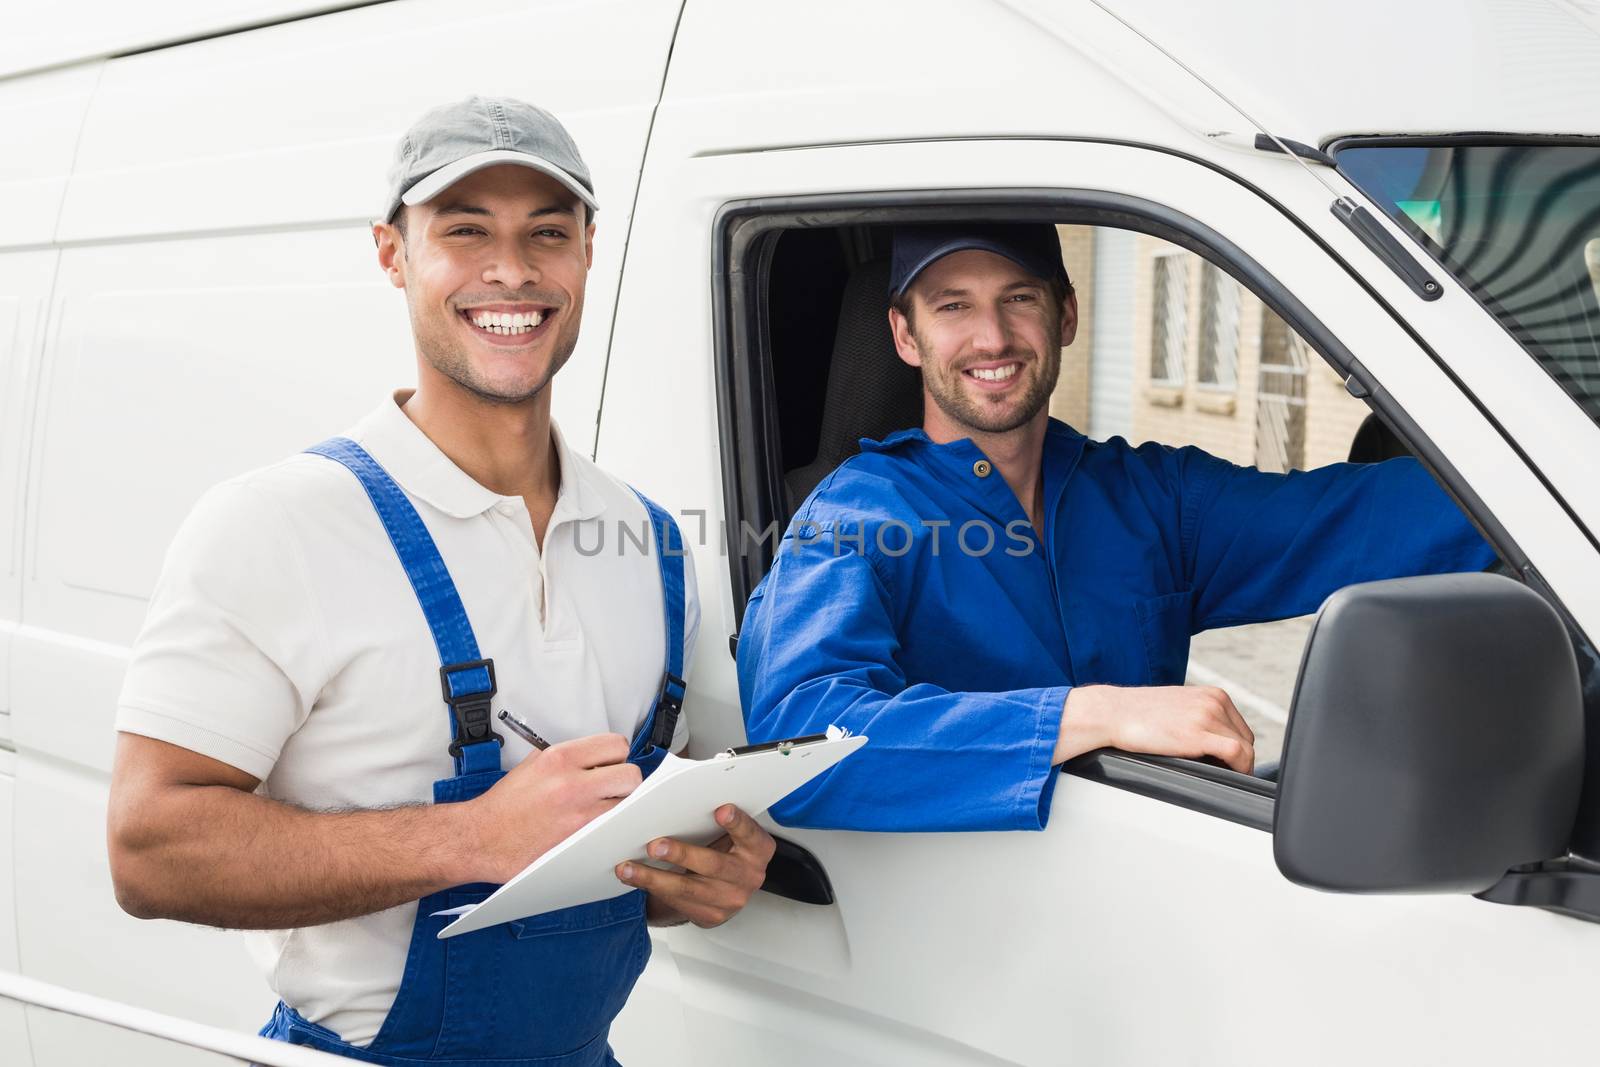 Delivery man getting signature from customer on white background